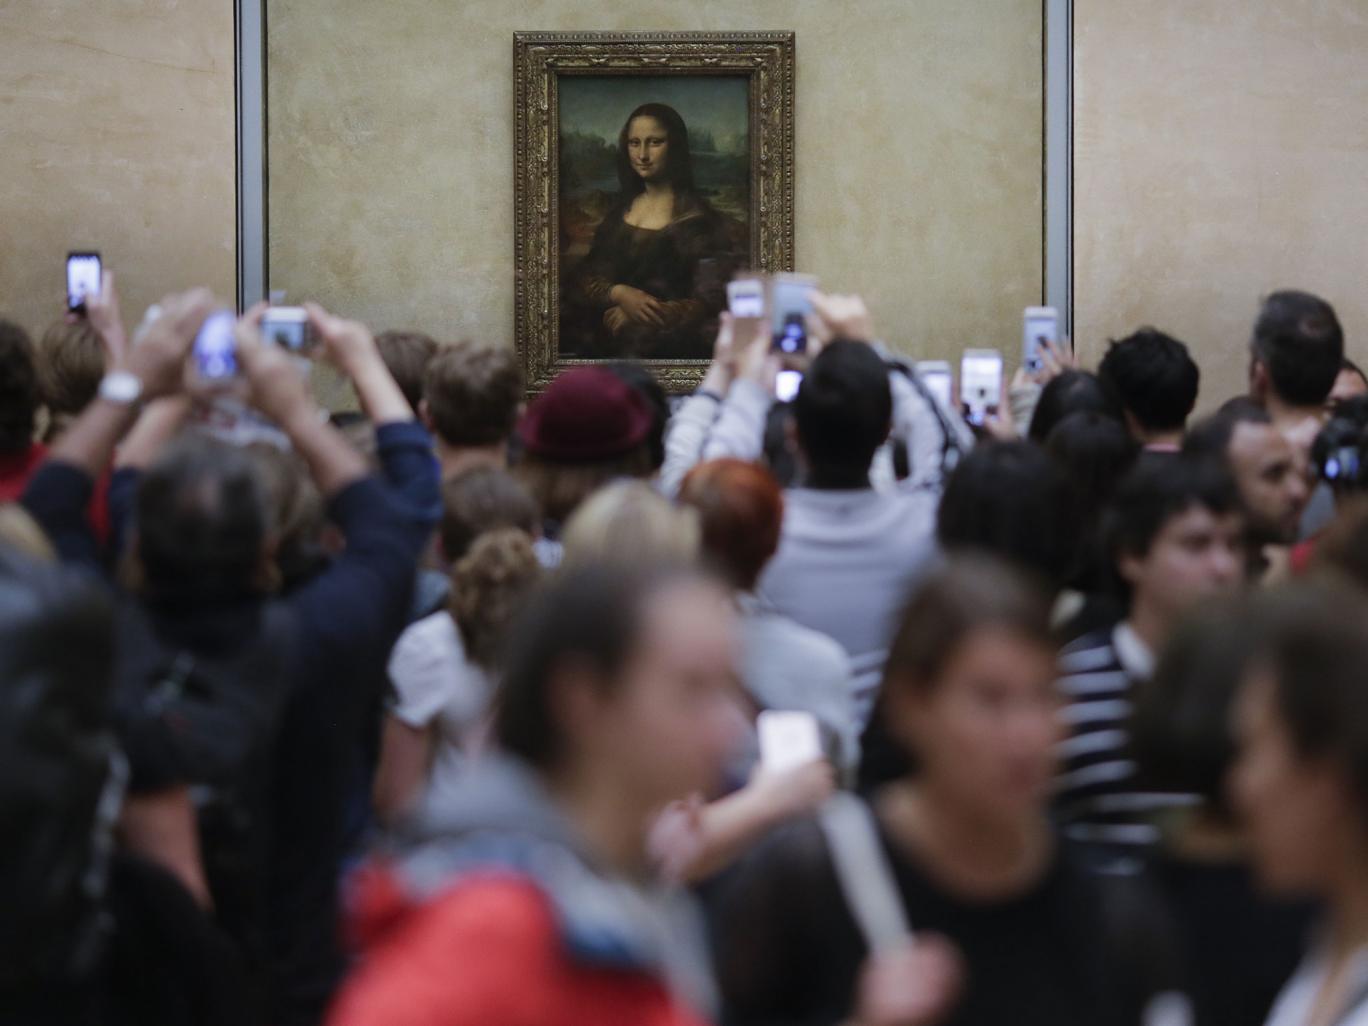 Paris shuts Louvre museum to protect priceless artworks as flood waters rise